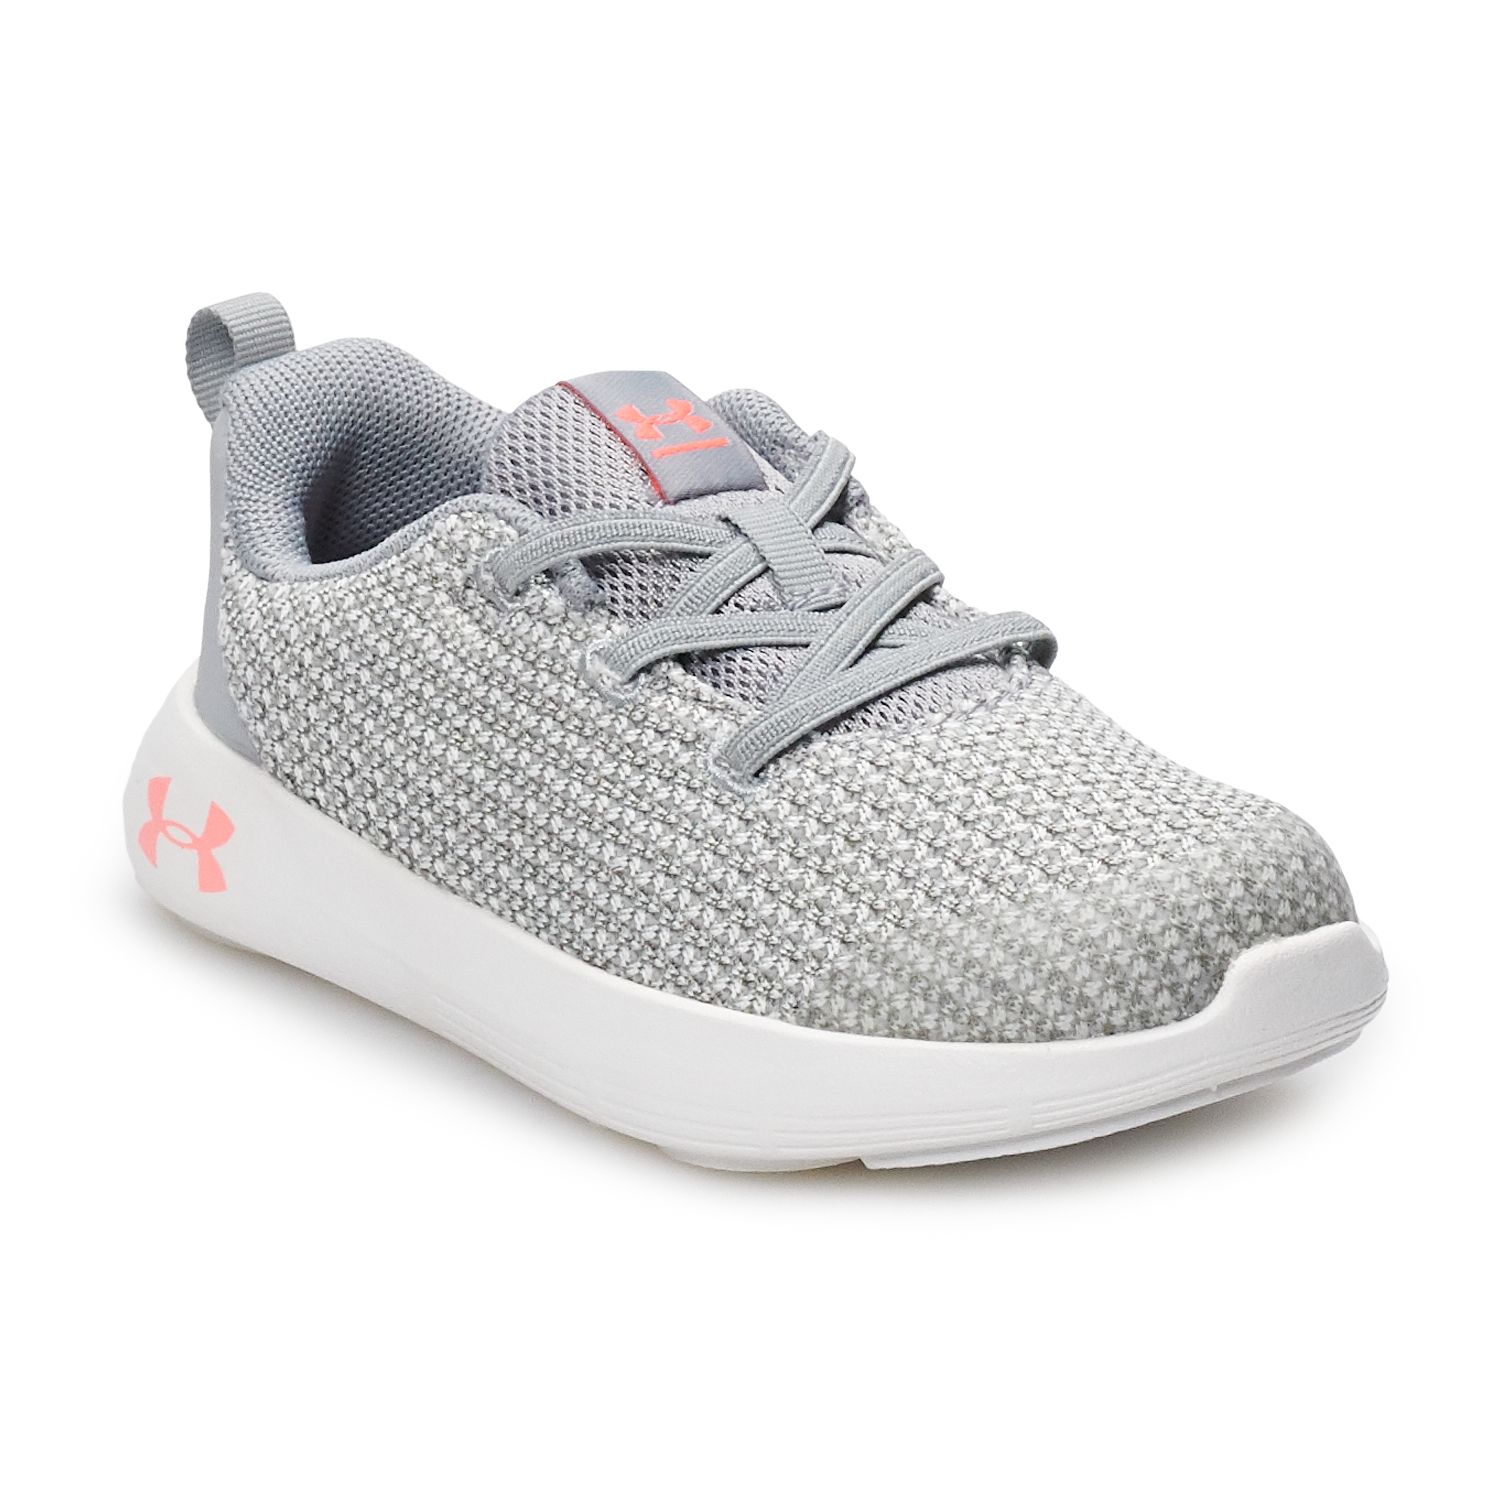 under armour baby girl shoes